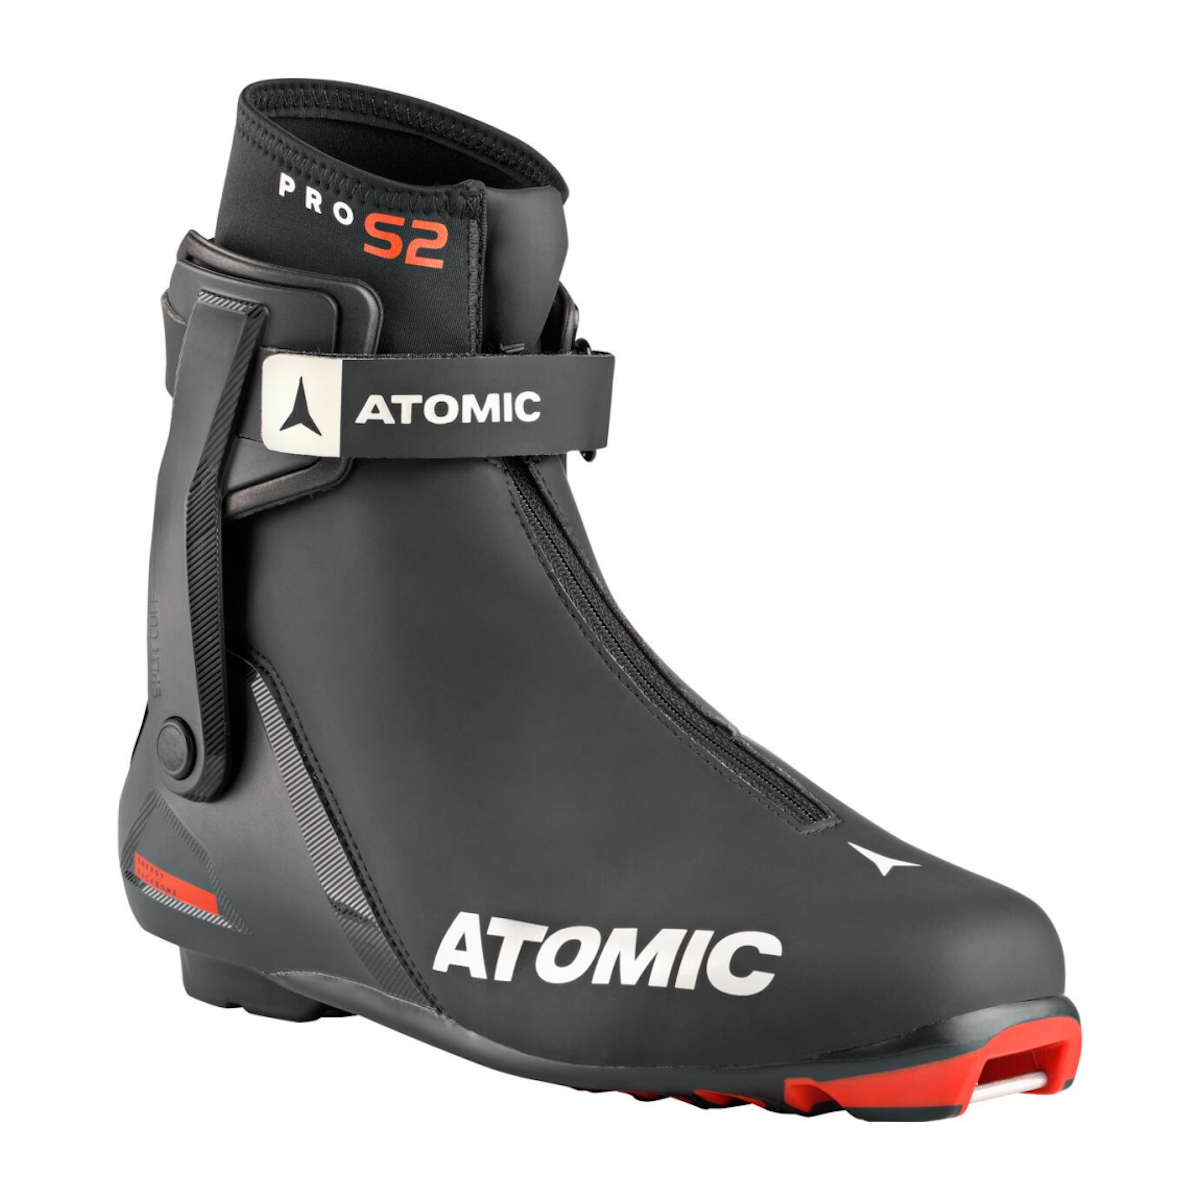 ATOMIC PRO S2 PL skating nordic boots - black/red